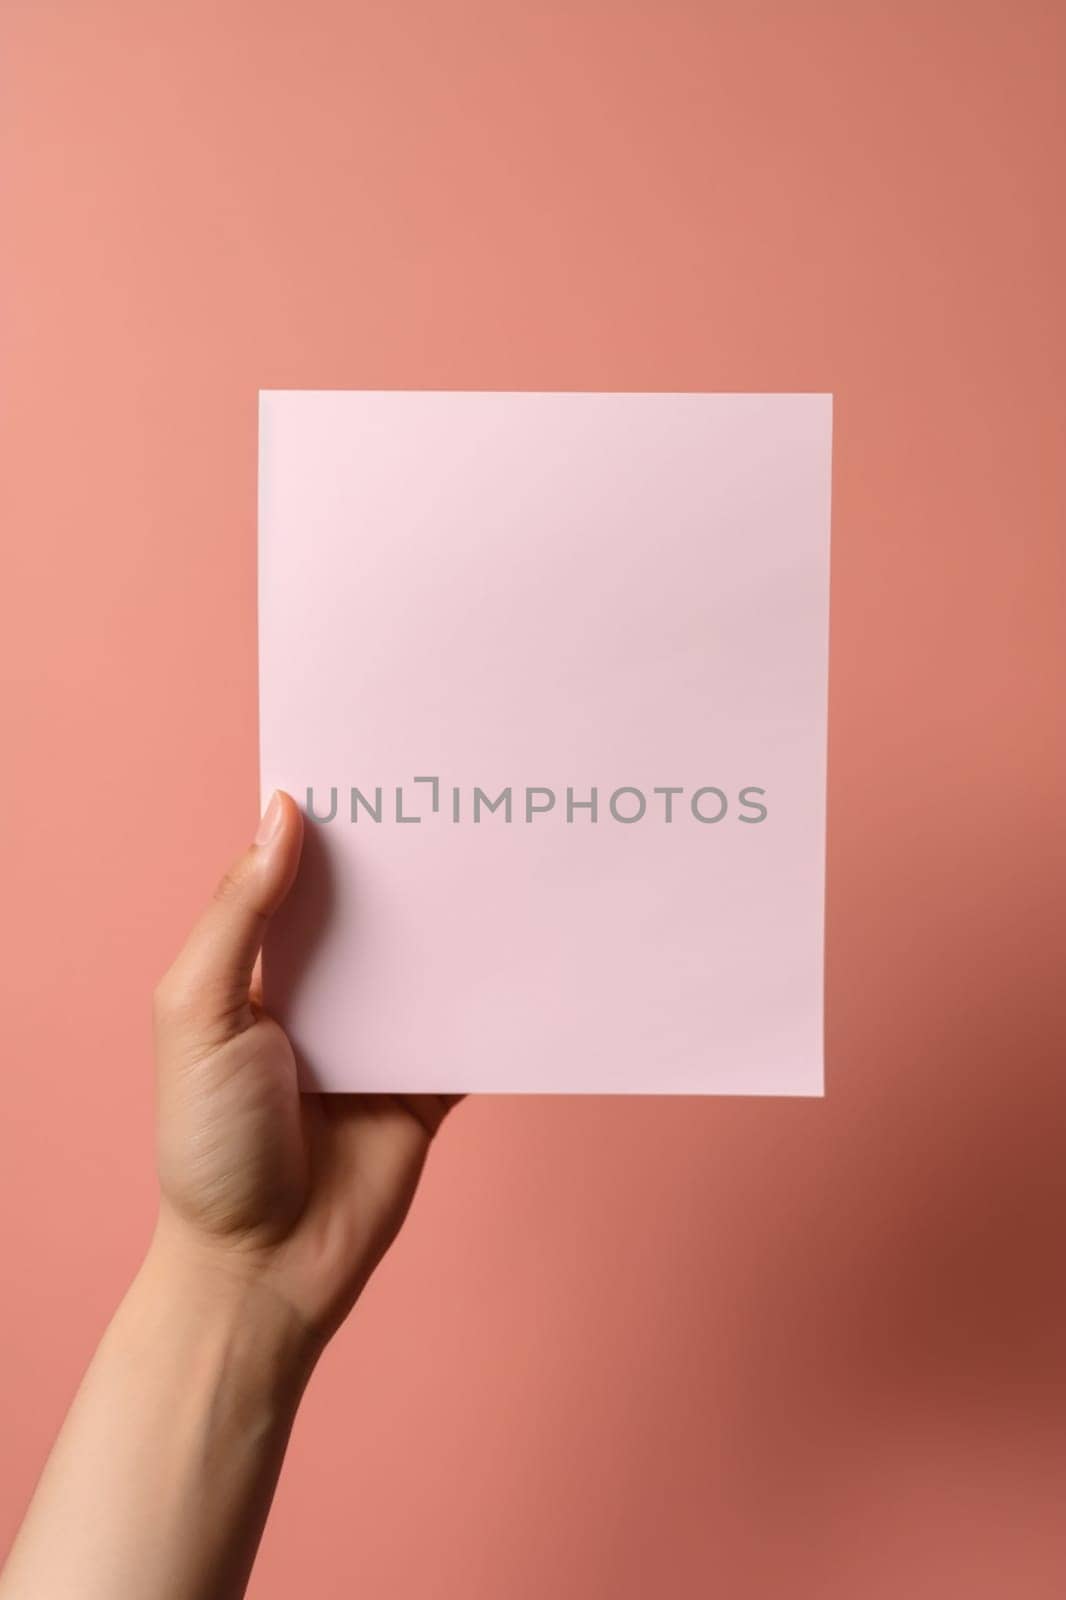 A hand holding a blank pink square paper against a pink background.